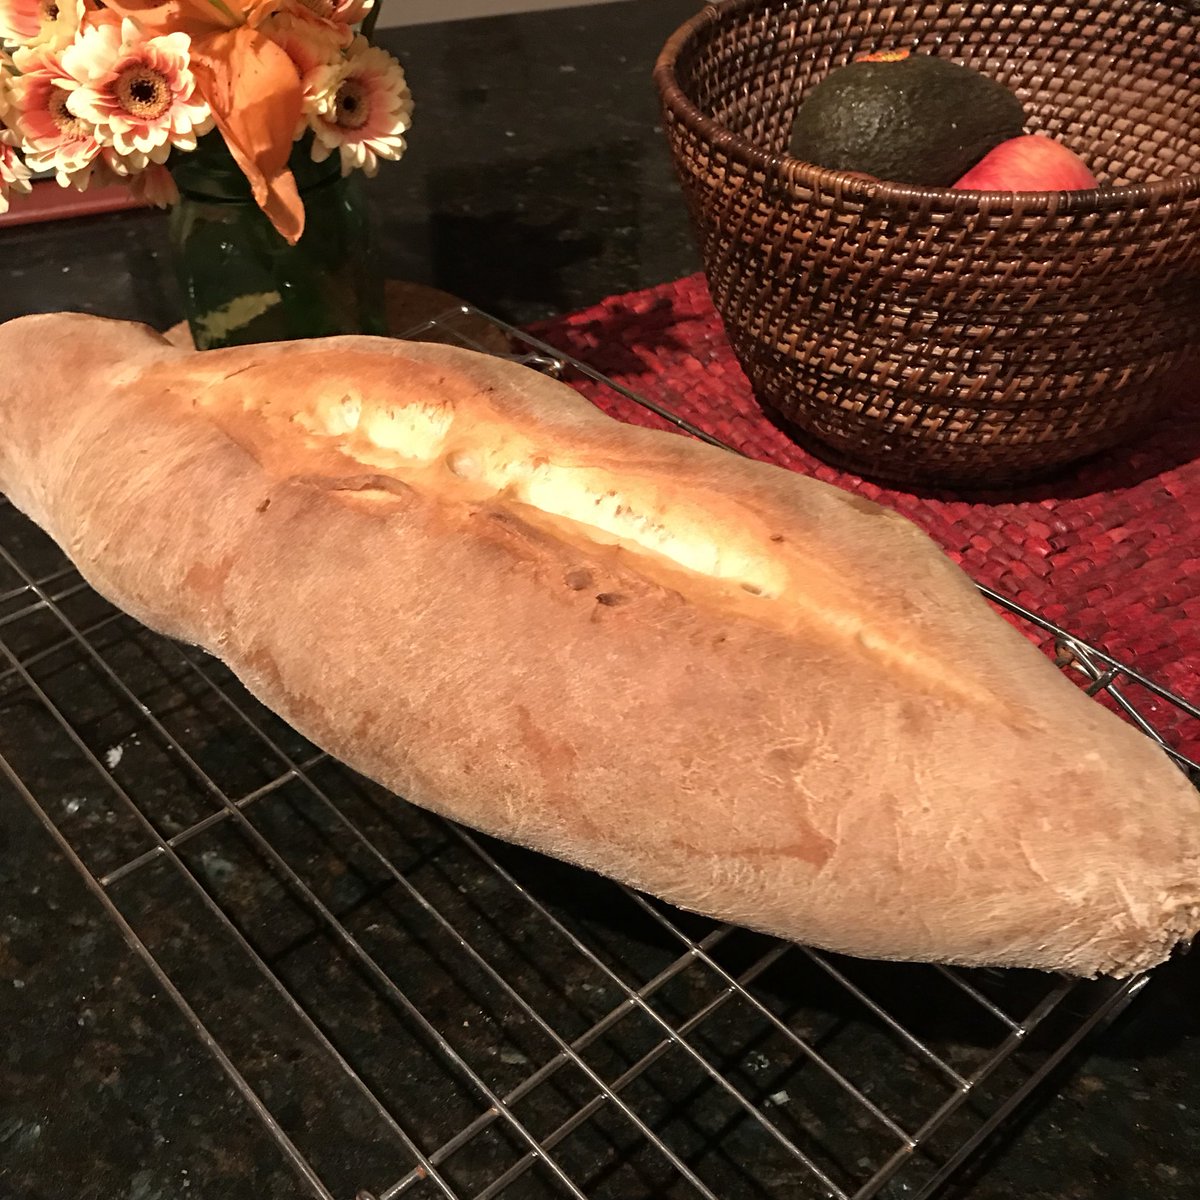 Bread #5: Classic Italian Bread. This is a really tasty bread w/ a beautiful crunchy crust. I cut it before it was cool or the crumb would probably look prettier  it took forever but mostly rising time. Would be great for a fancy dinner. I’m still kinda bad at shaping loaves.